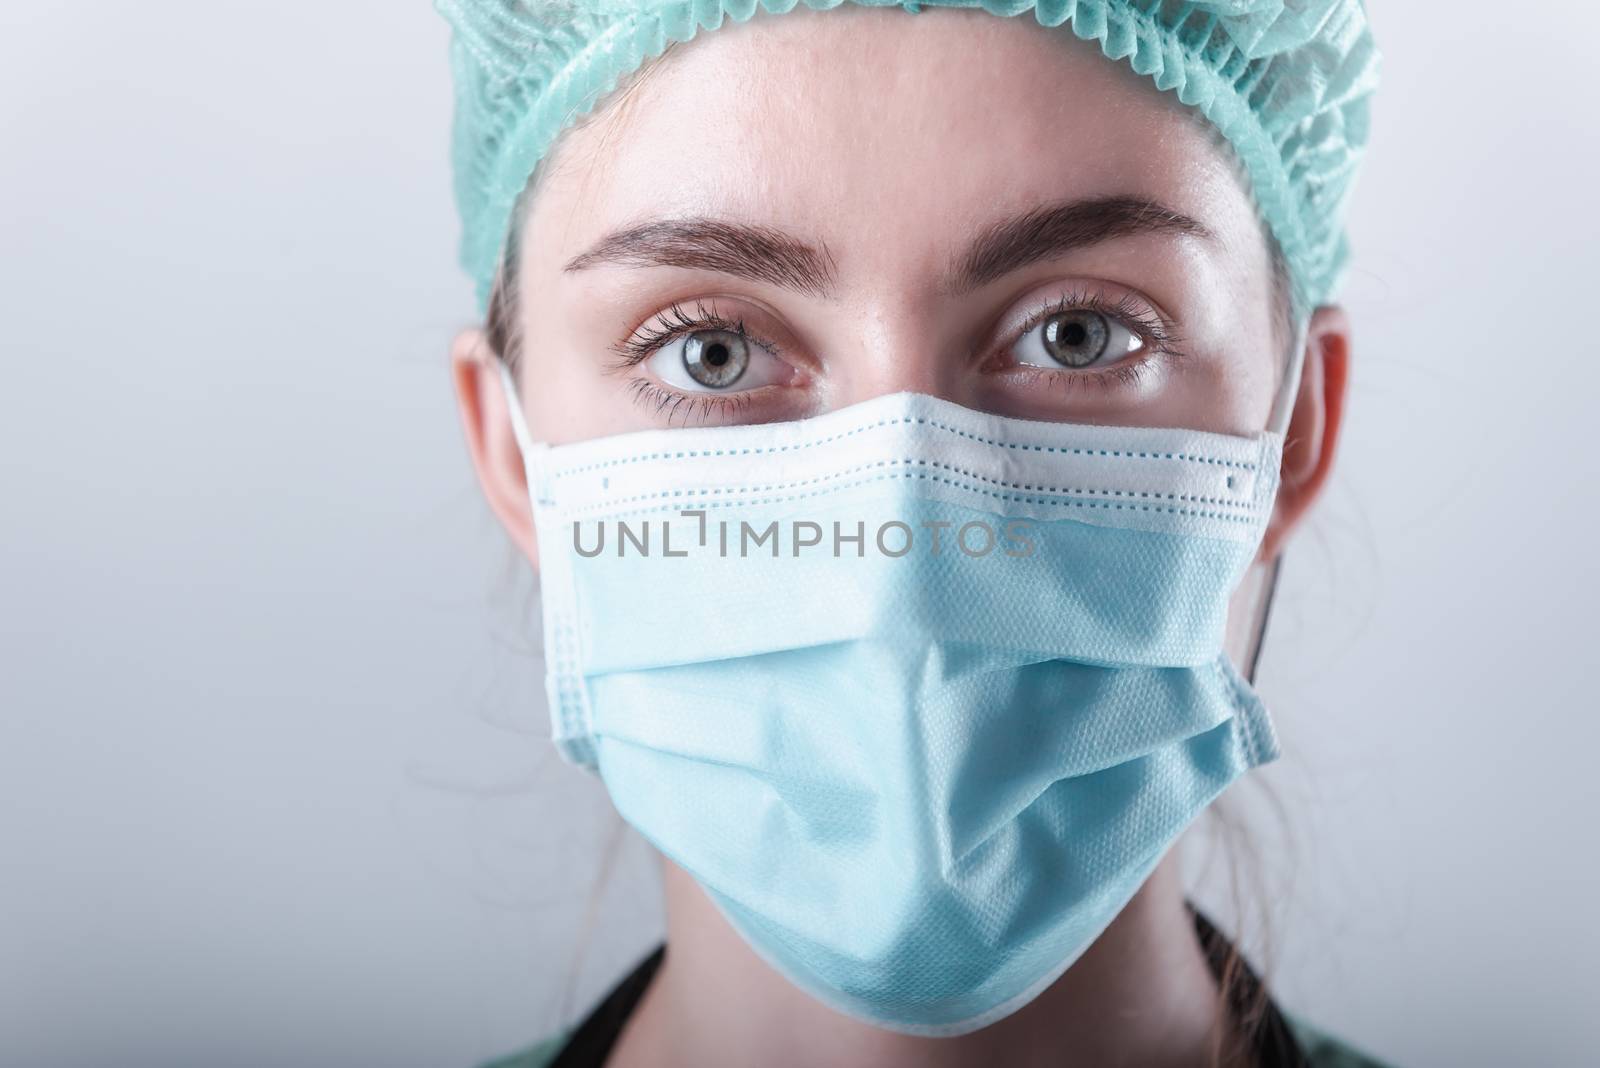 Female Doctor in Protective Mask and Medical Cap on Isolated Background, Closeup Portrait of Medicine Surgeon Doctor Wearing Medical Mask With Copy Space. Clinical Health Care/Doctors Occupation